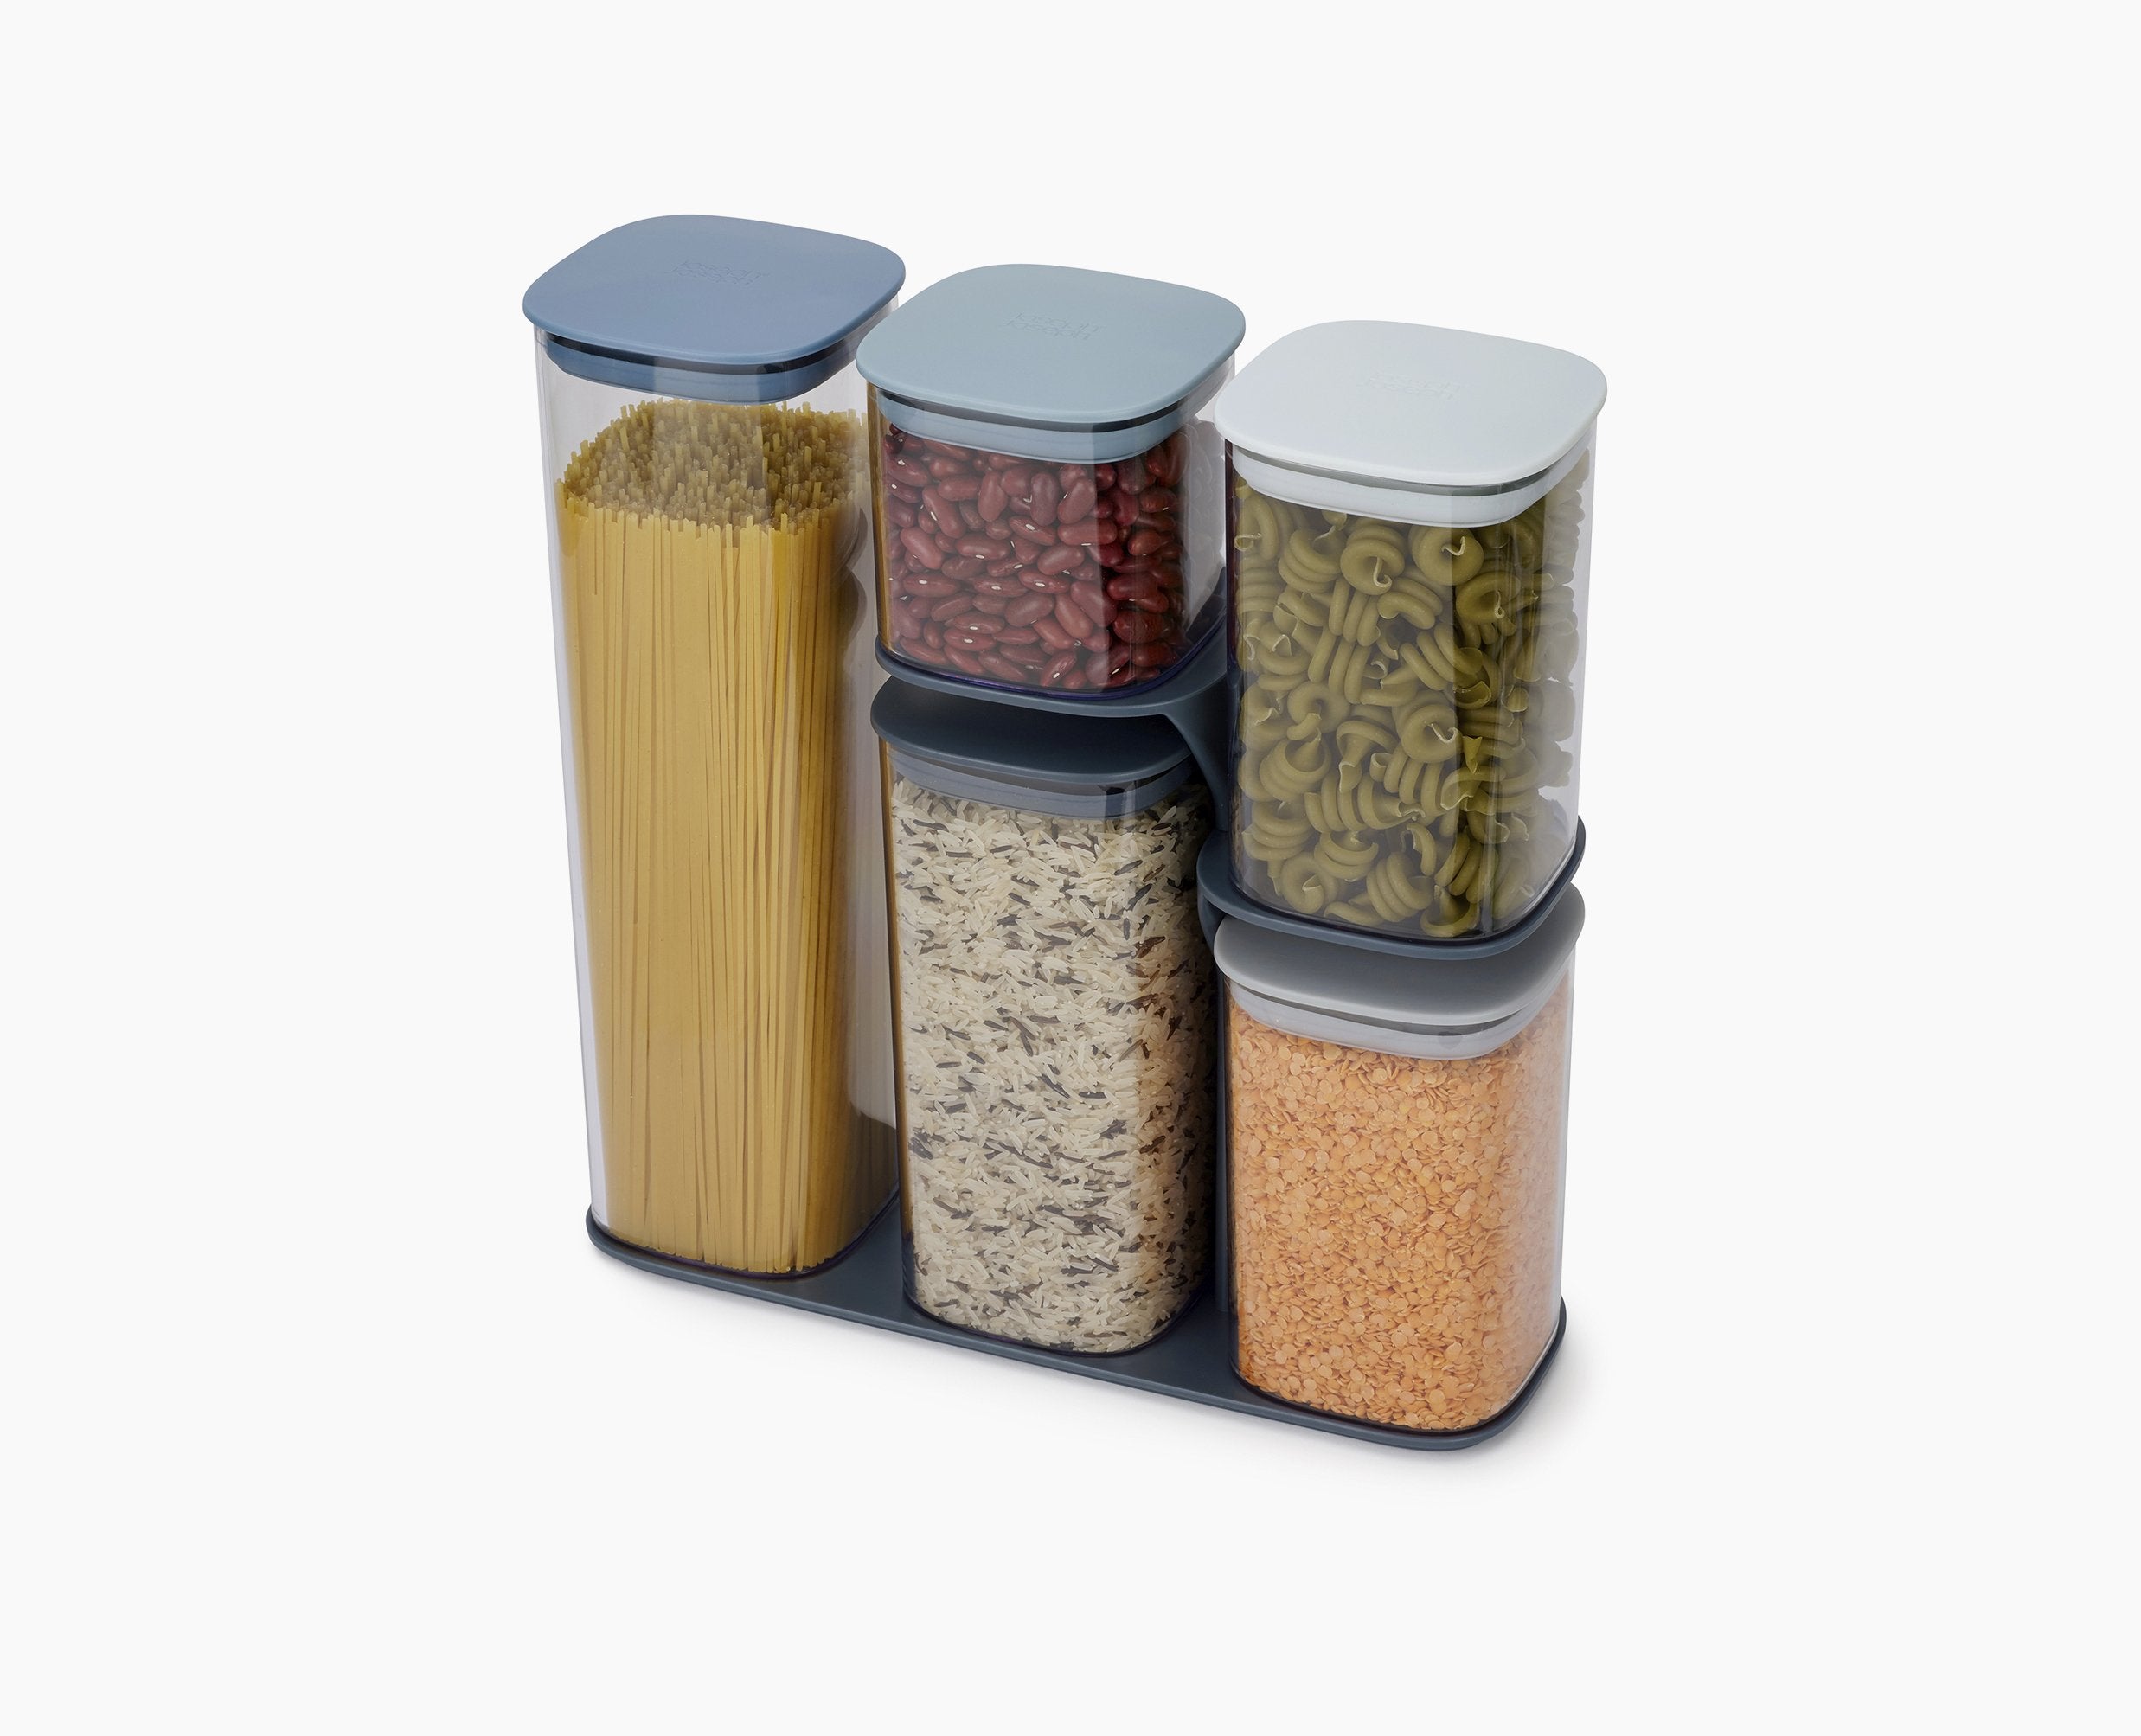 BEON.COM.AU  This smart storage container set features 5 food storage containers with a clever stand that allows easy access to any jar, regardless of its position.  Clever stand allows any container to be accessed easily without removing others around it Containers feature airtight silicone seals and easy-p... Joseph Joseph at BEON.COM.AU